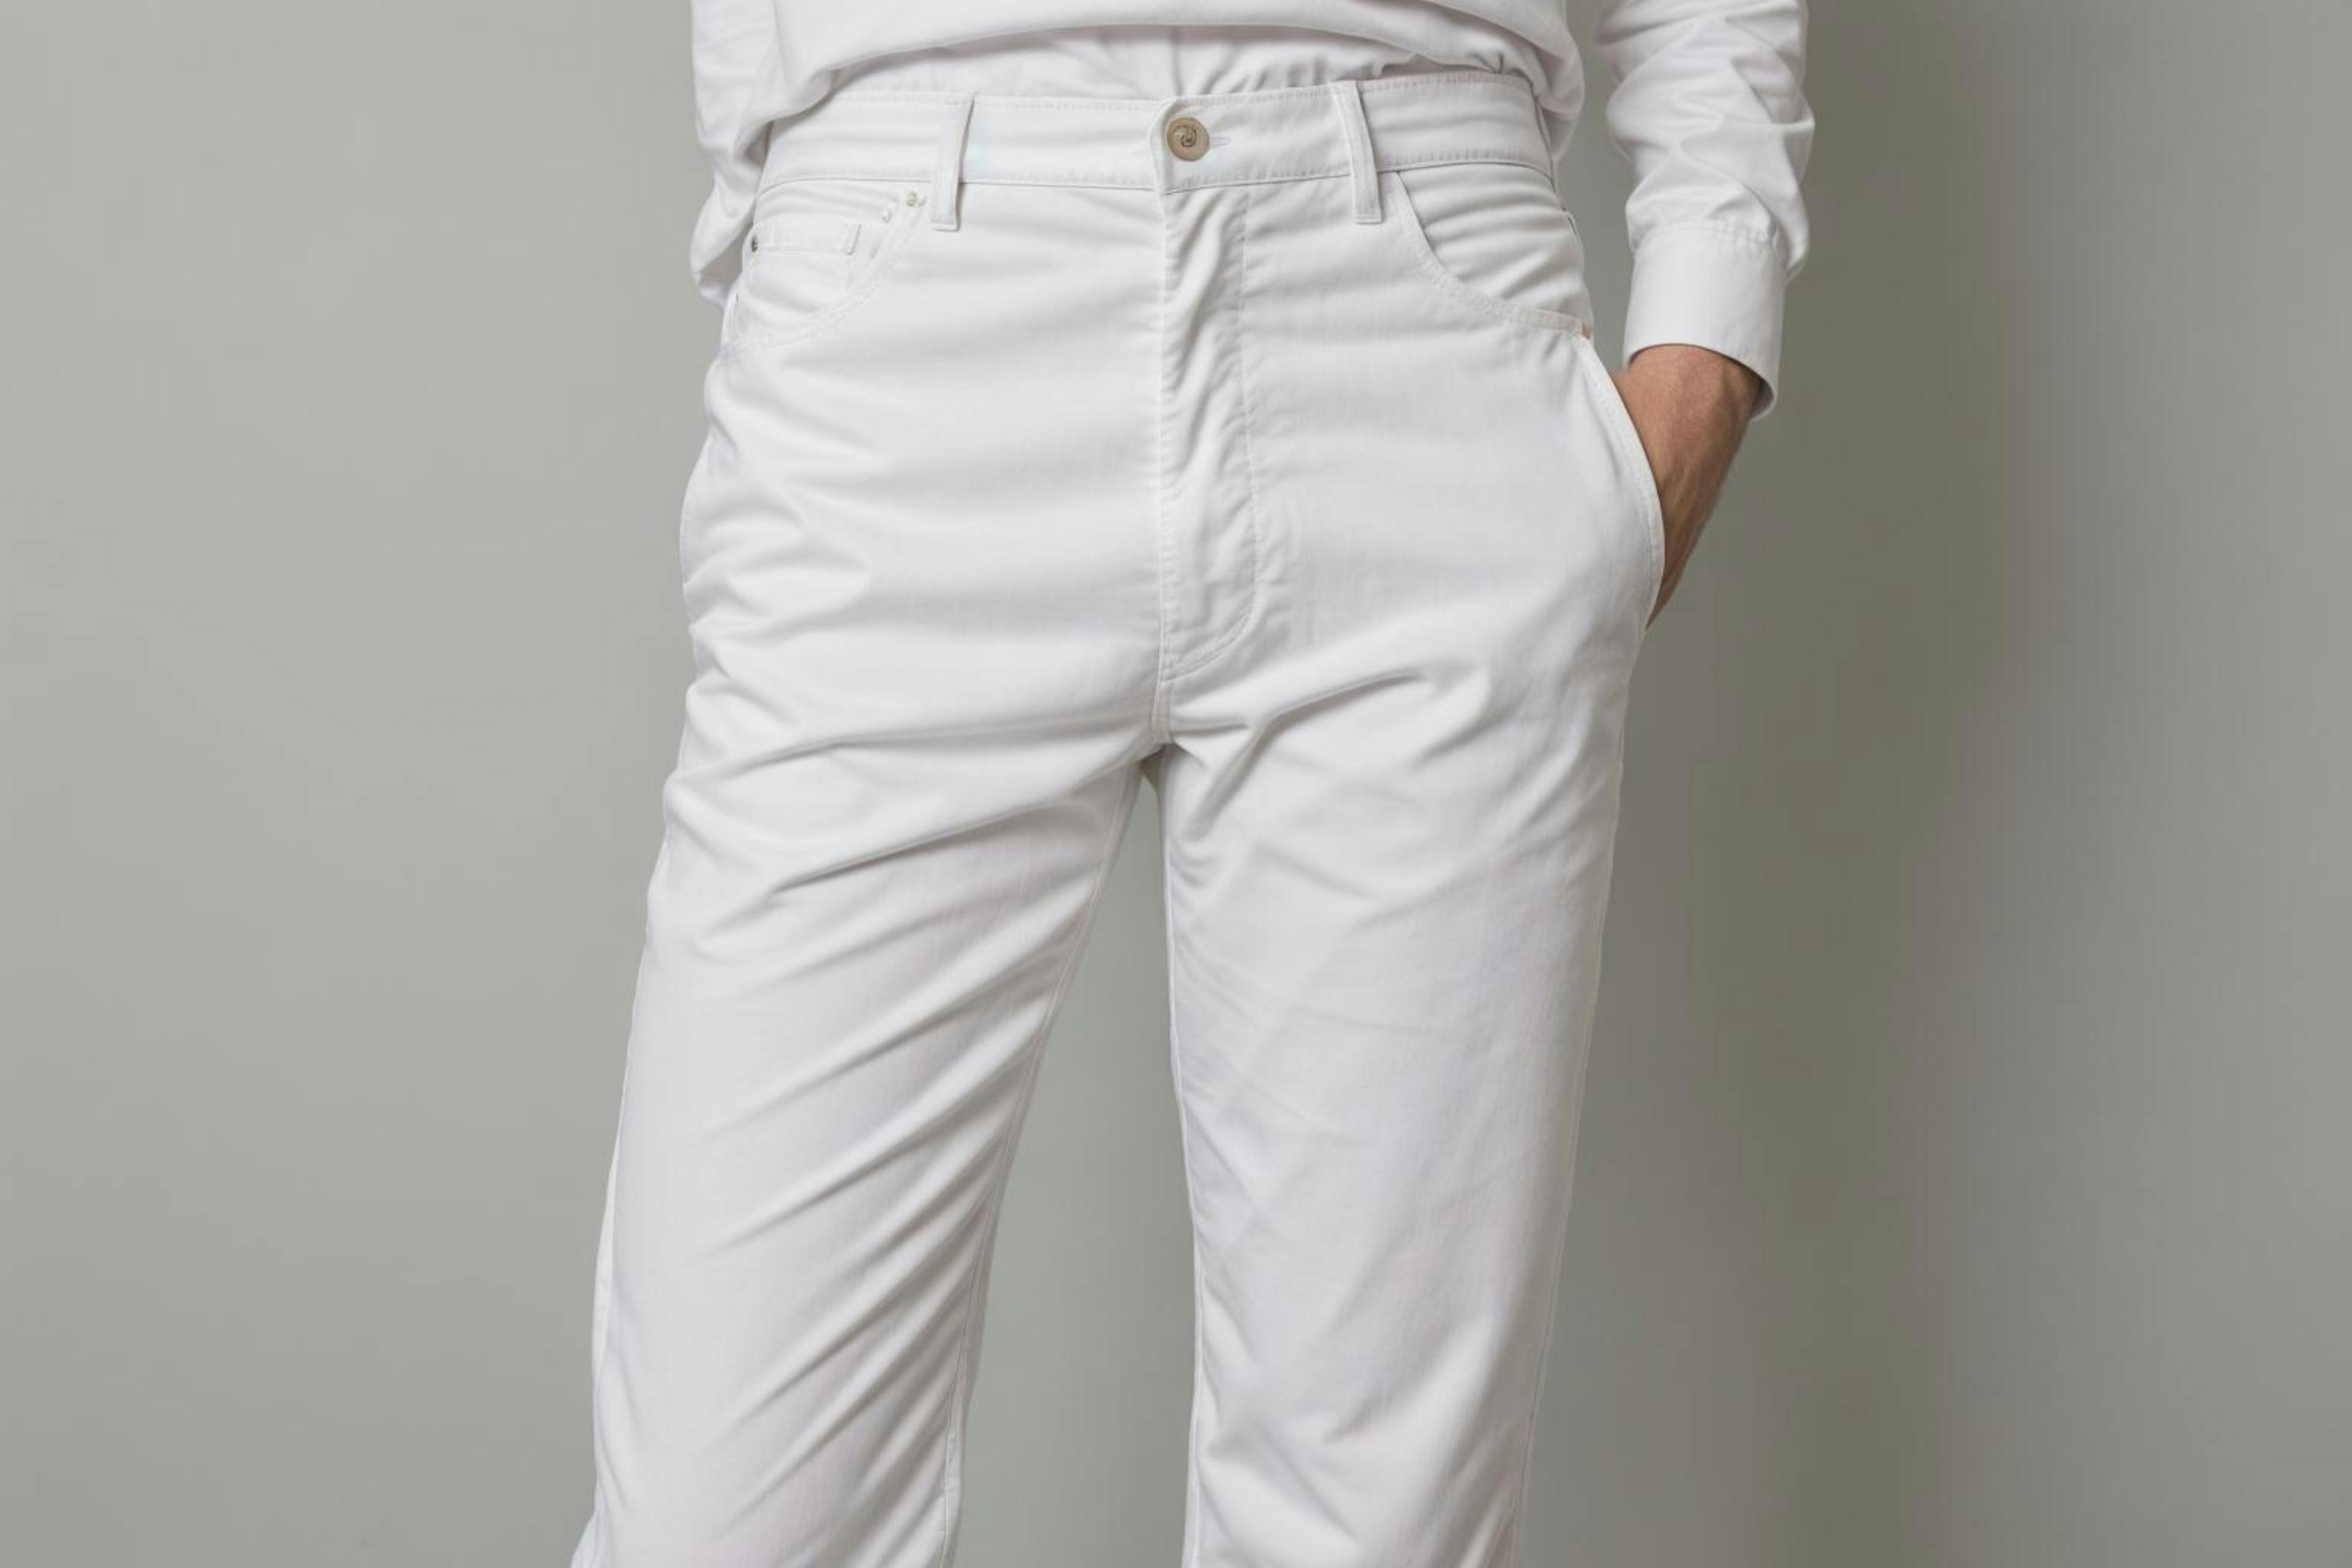 Front view of a man wearing white pants